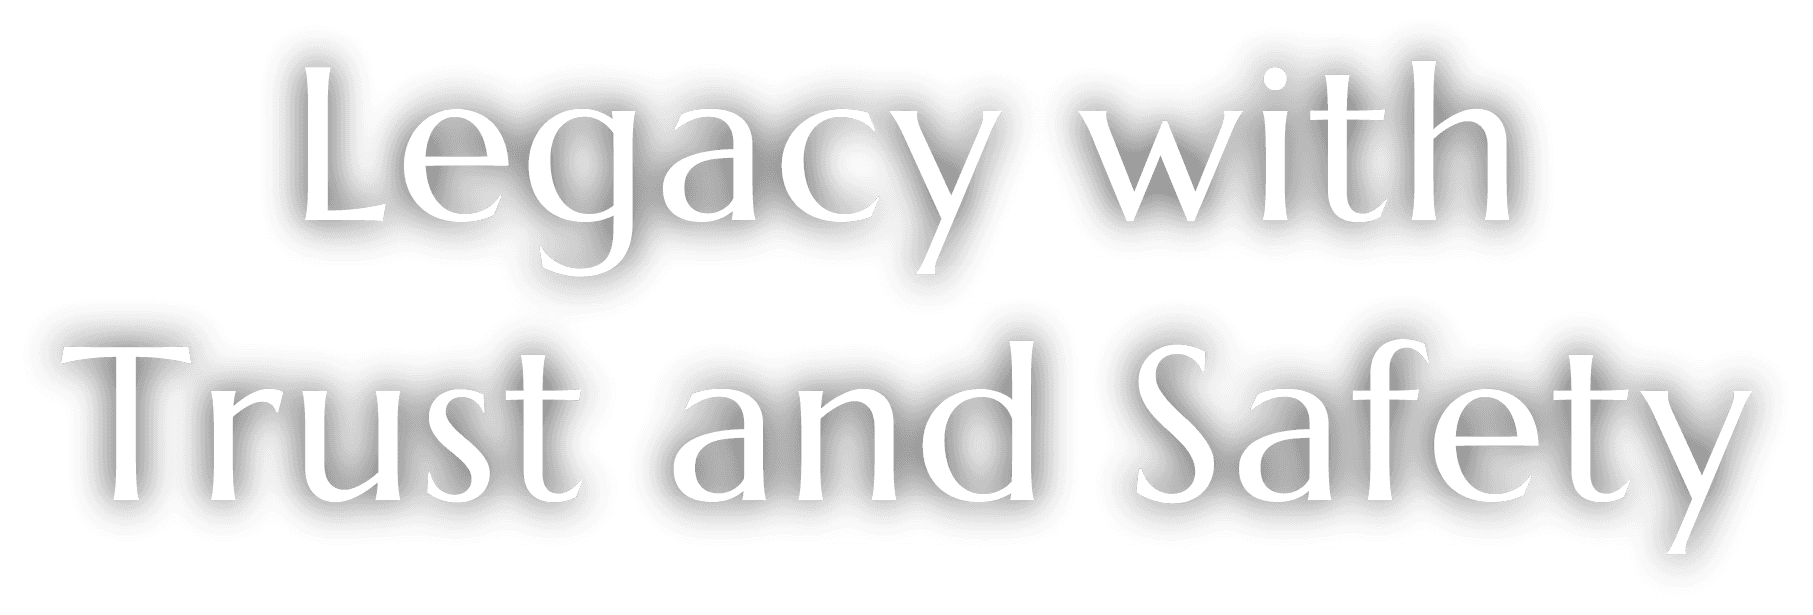 Legacy with Trust and Safety